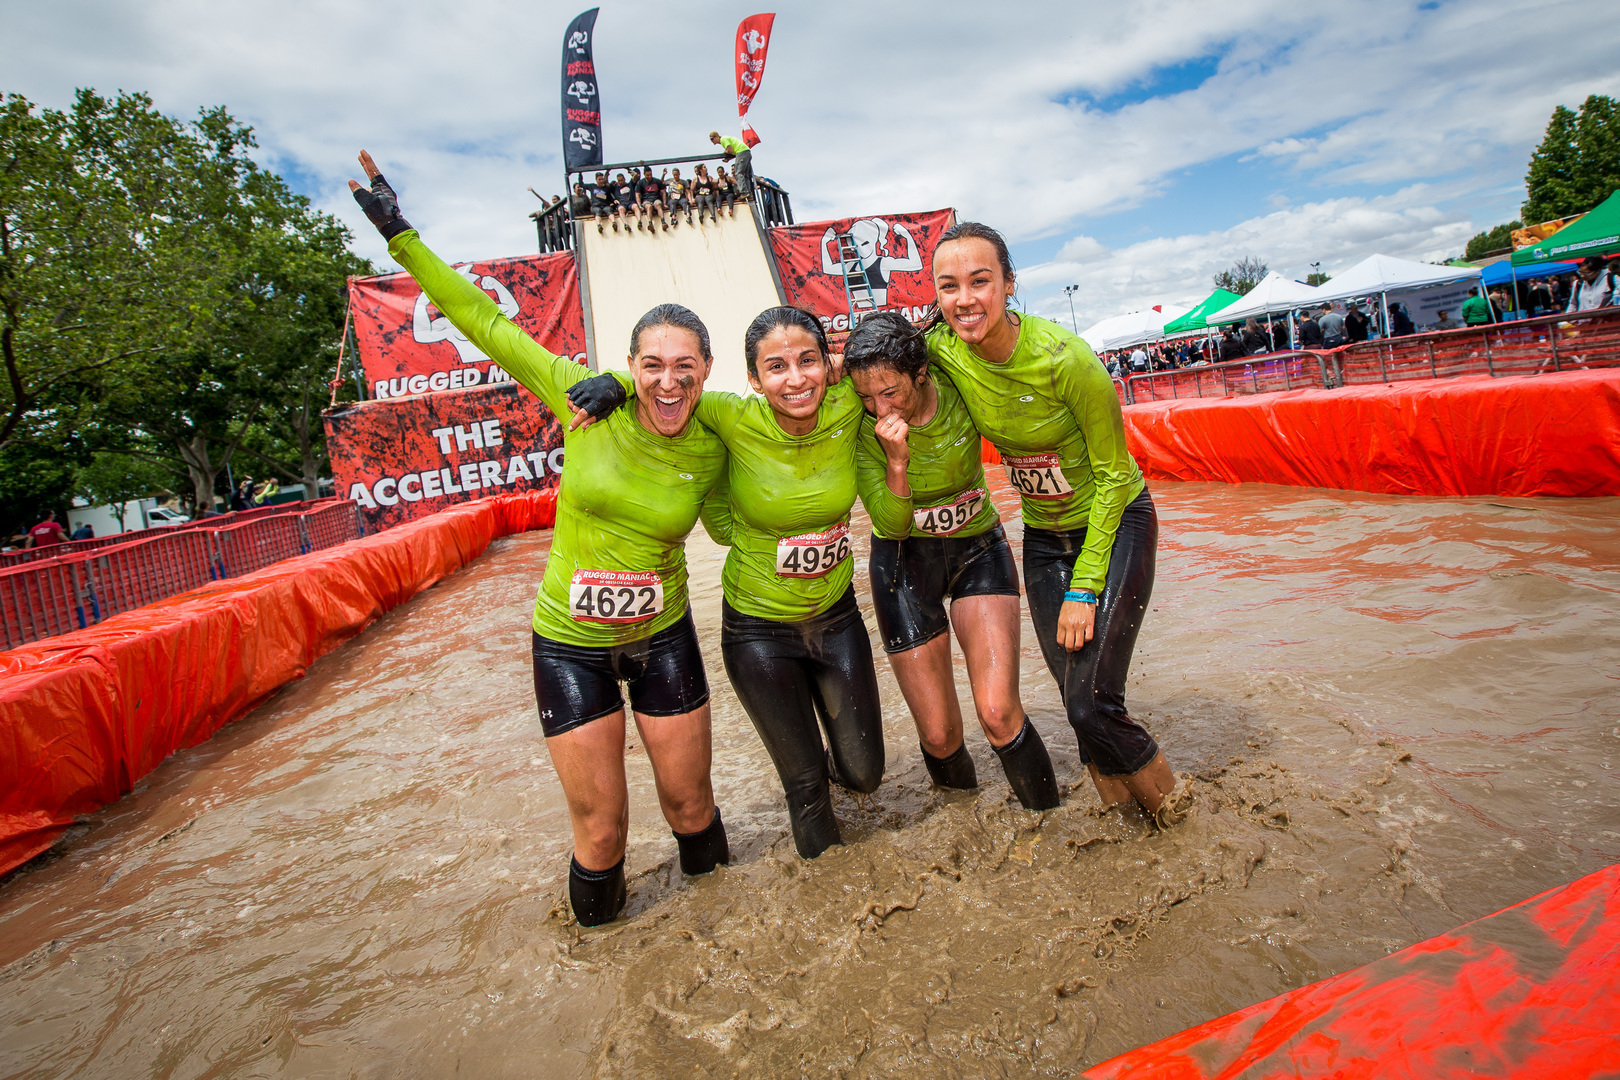 19+ Rugged Maniac Nj 2018 Pictures PNG Toaster